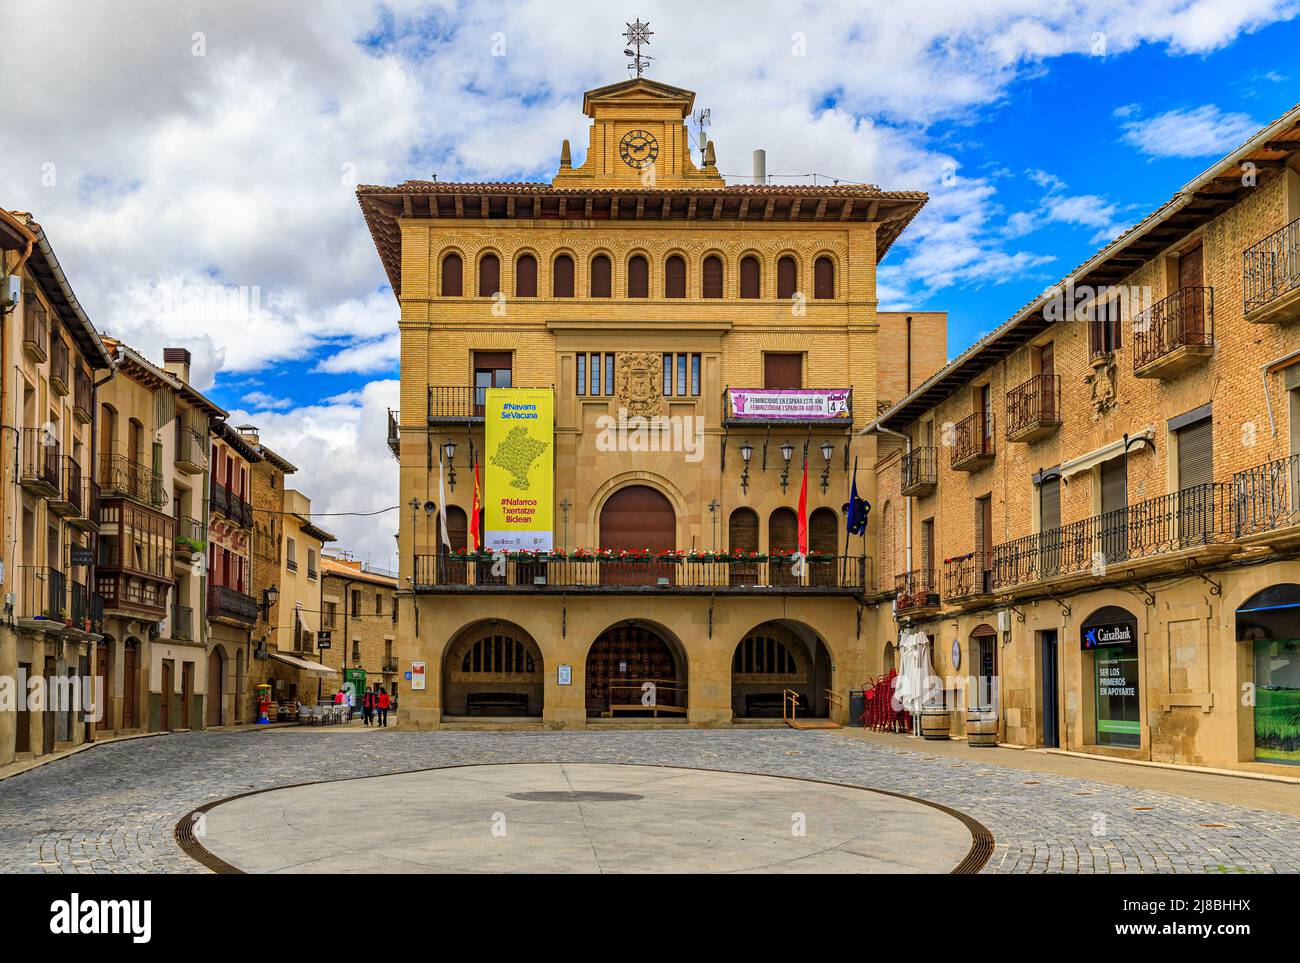 Olite, Spain - June 23, 2021: City Council building and medieval houses on Plaza de los Teobaldos square in the town famous for a Royal Palace castle Stock Photo